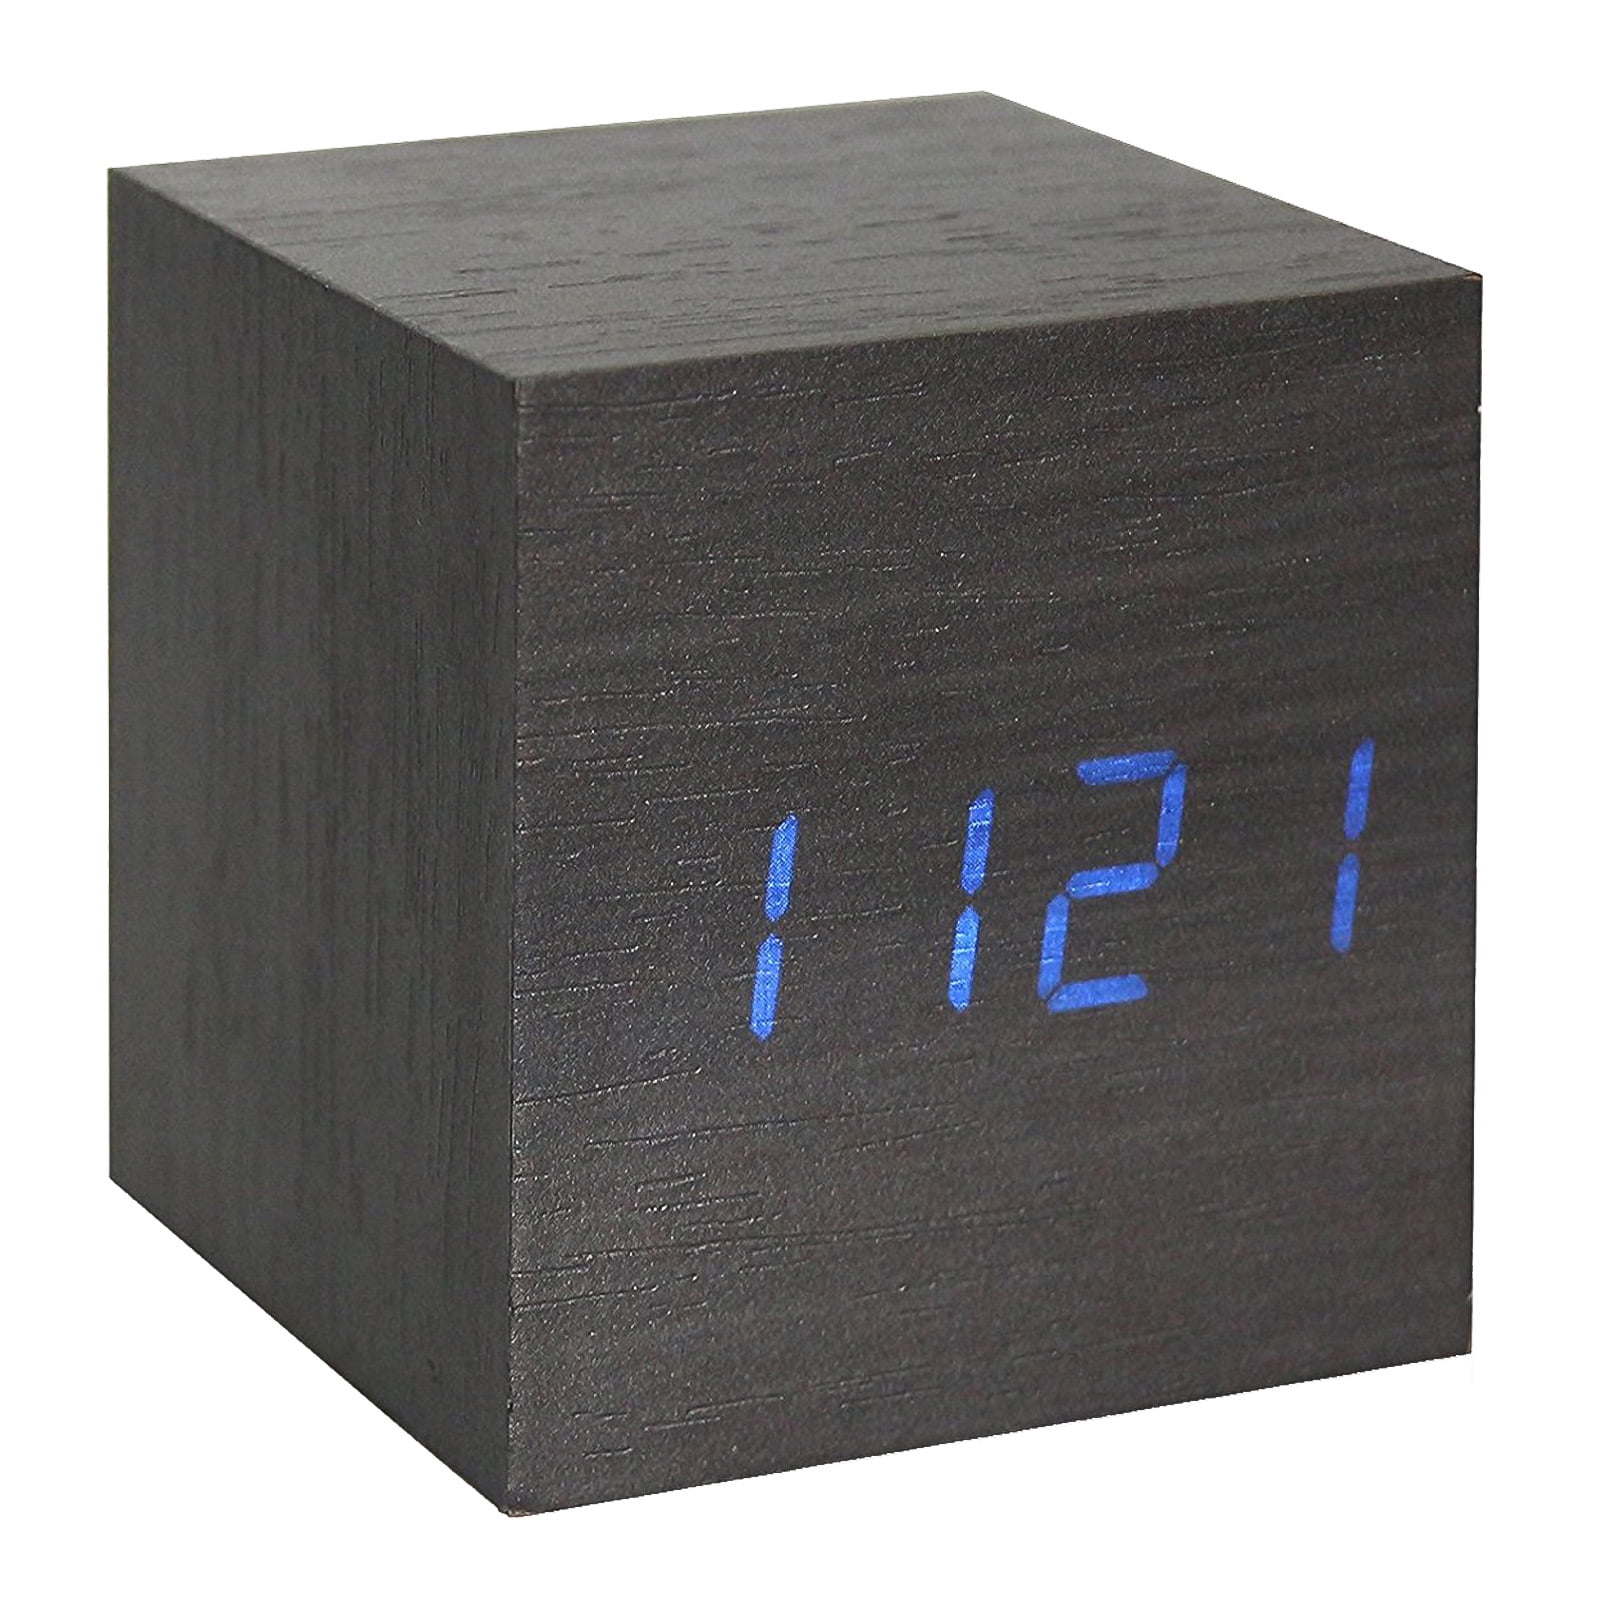 Modern Cube Wooden Wood Digital LED Desk Voice Control Clock Alarm Thermome V8G9